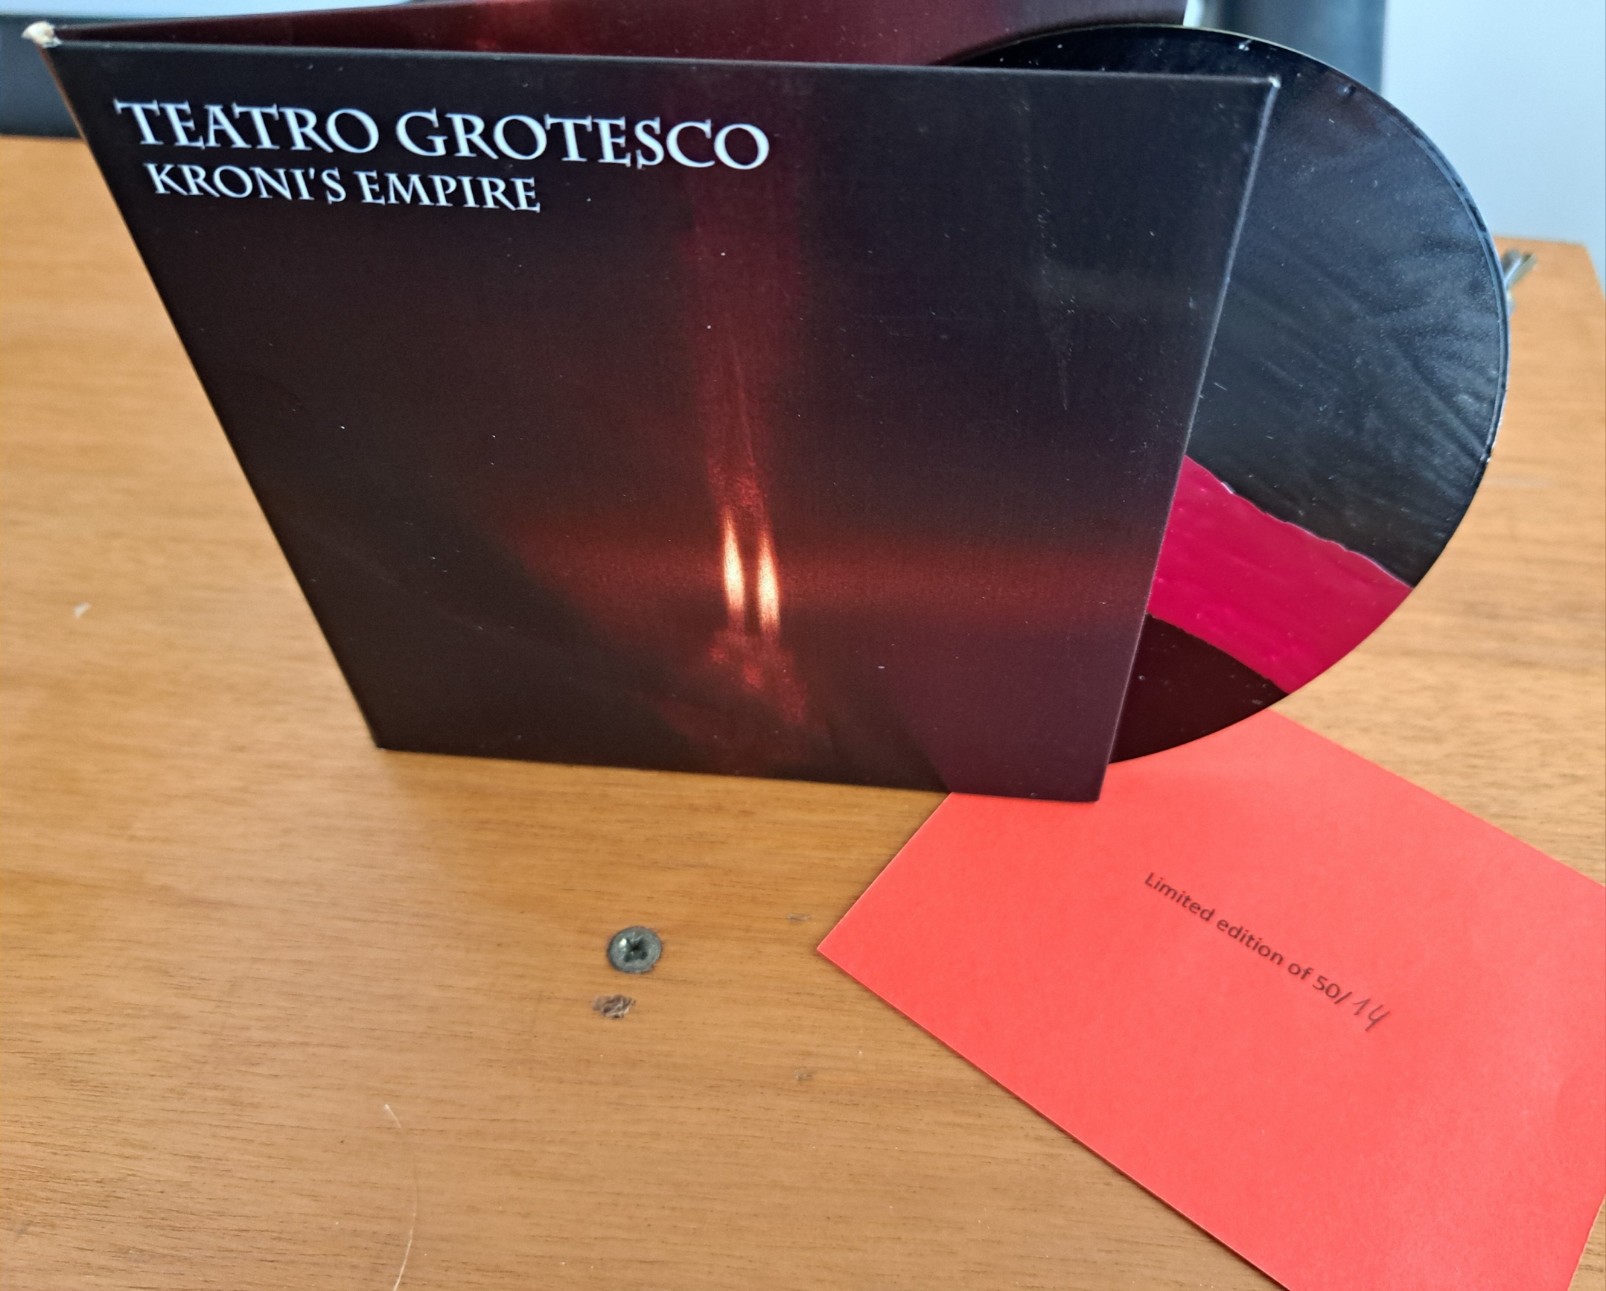 A picture of Kroni's Empire, Teatro Grotesco's full album on CD. The disc itself was hand-painted in this 50 copies limited edition, and this copy is numbered 14.